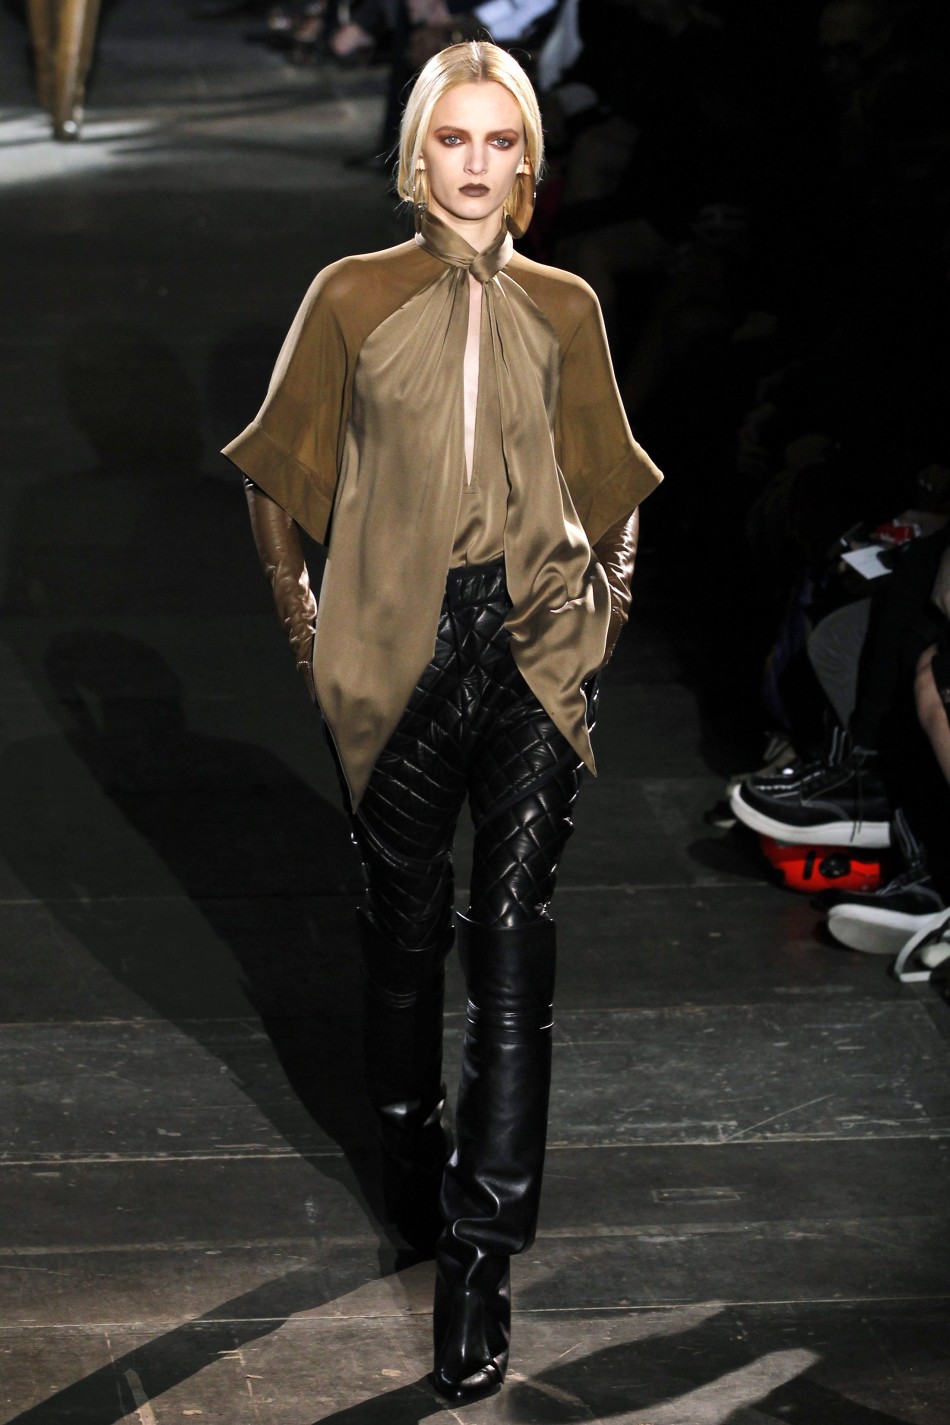 Riccardo Tiscis Equestrian Collection for Givenchy at Paris Fashion Week